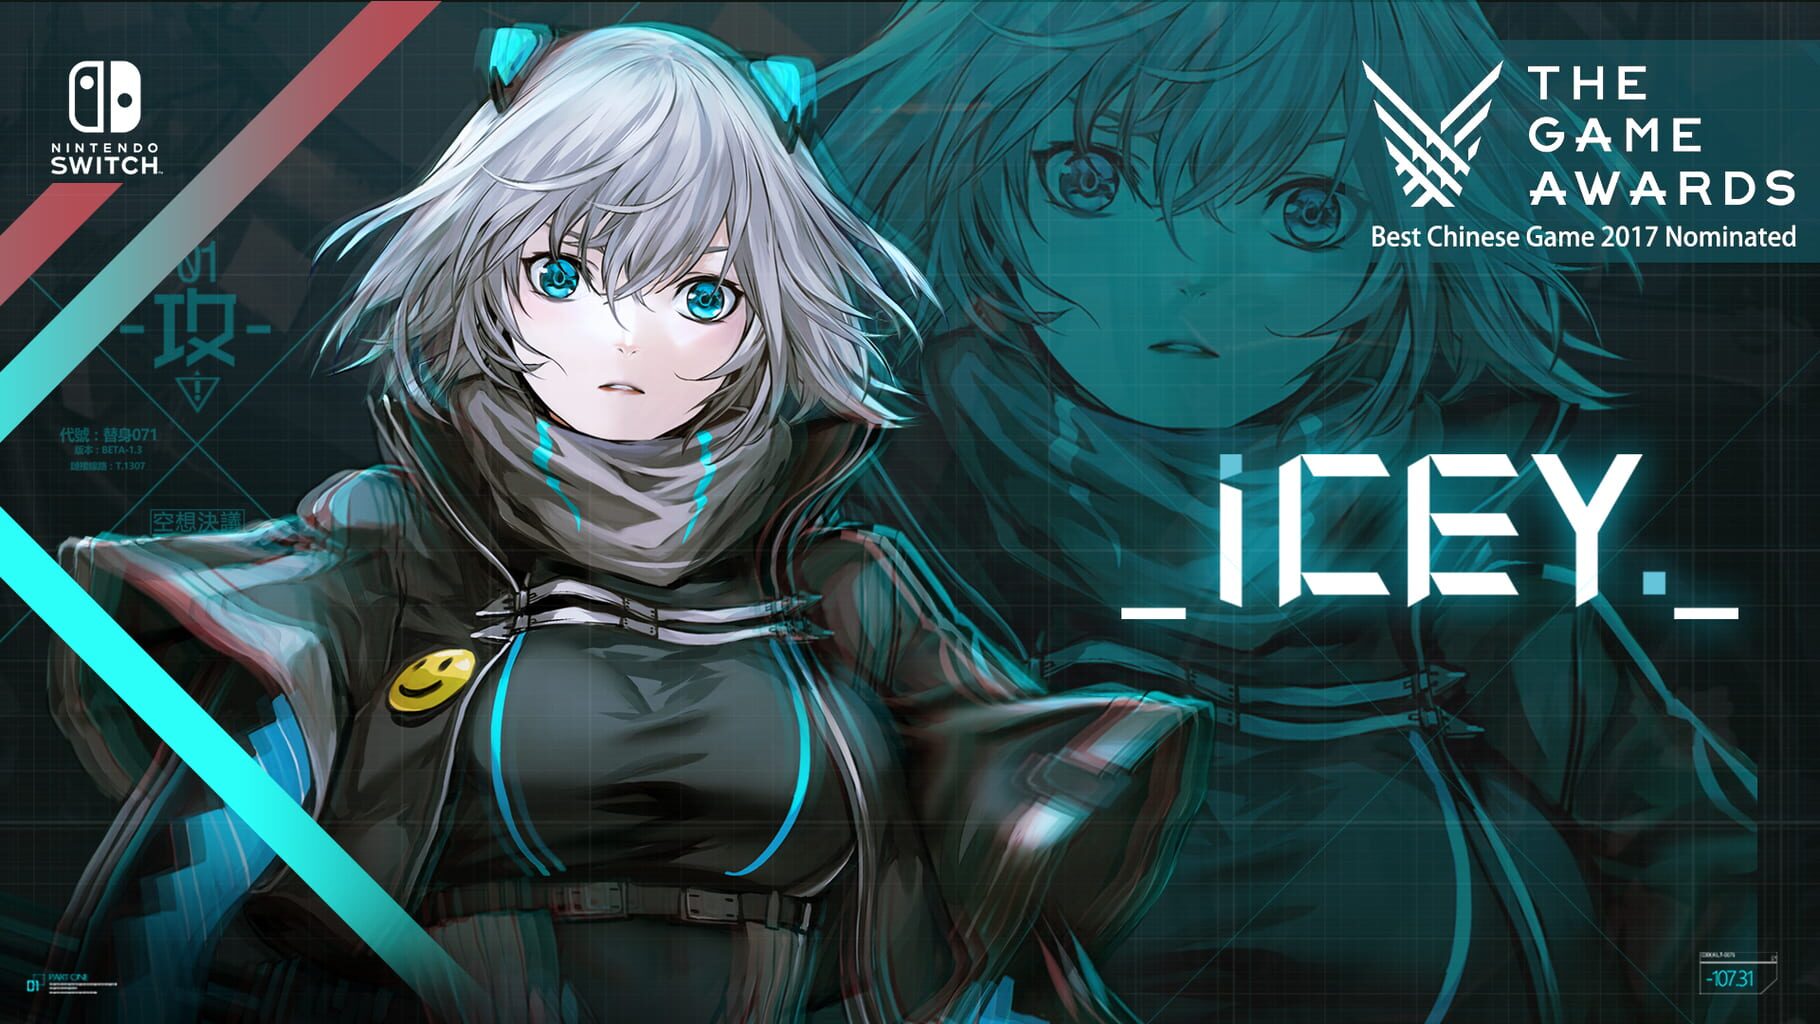 Artwork for Icey